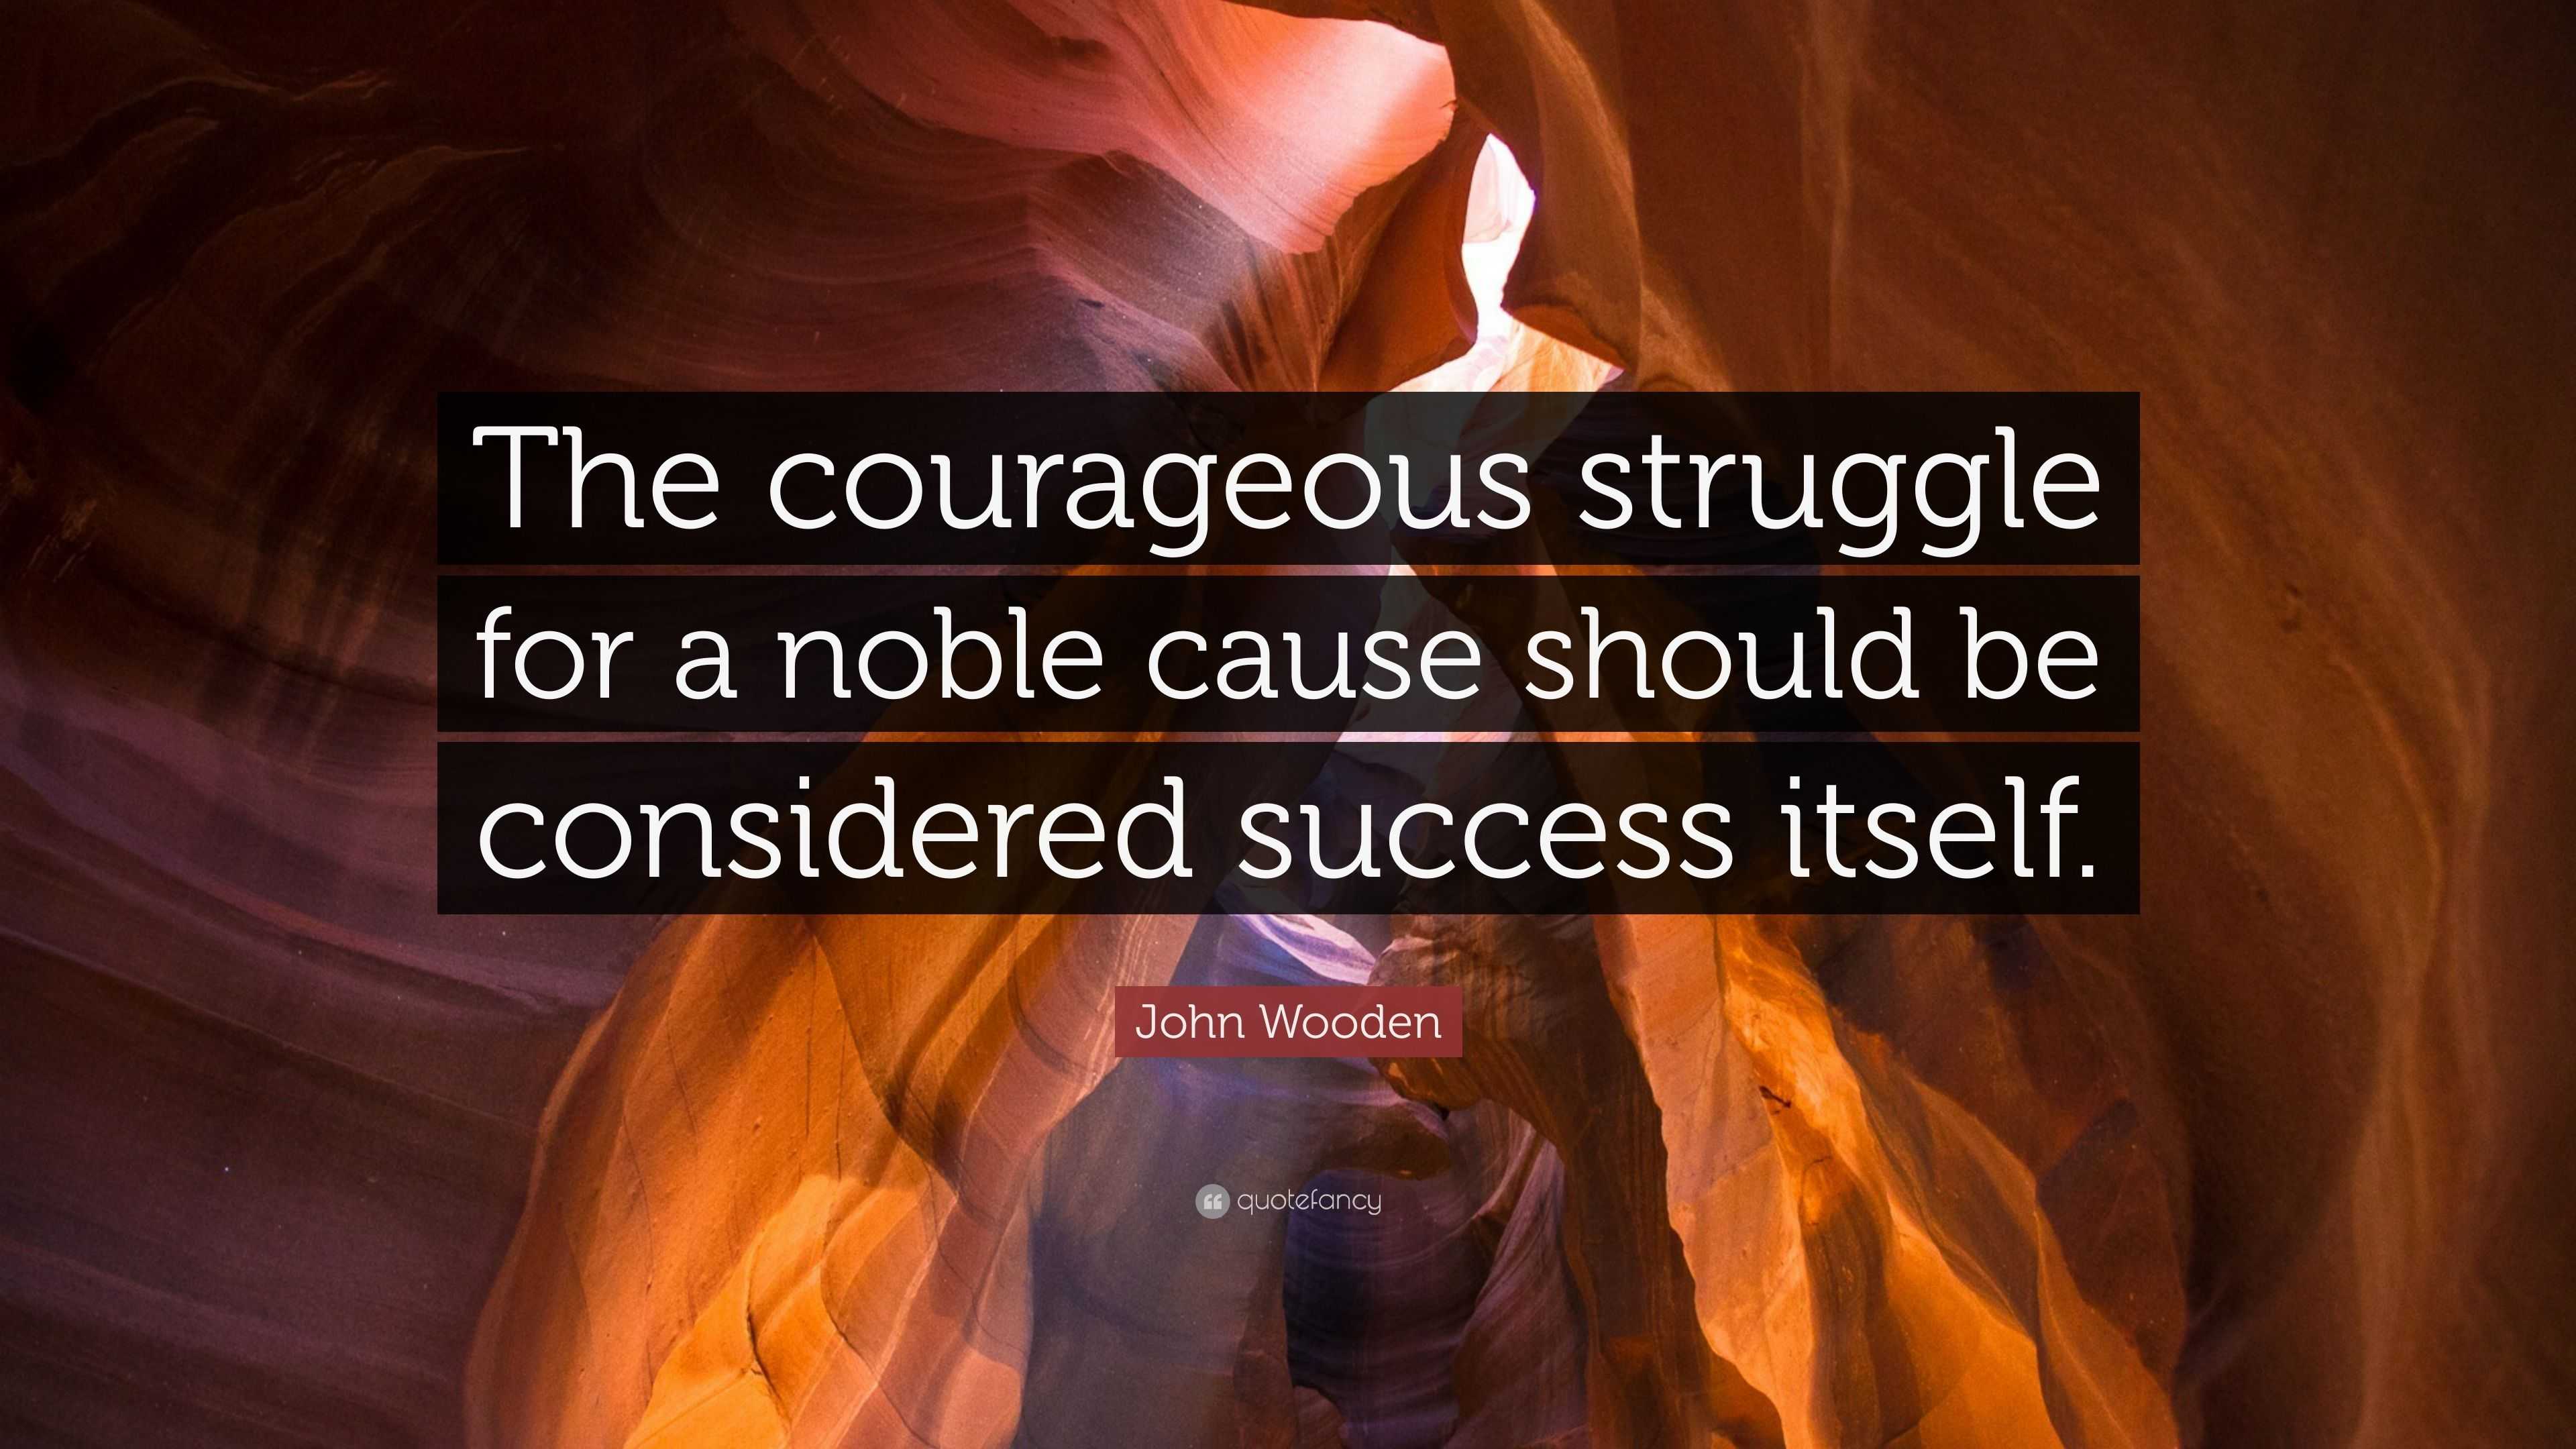 John Wooden Quote: “The courageous struggle for a noble cause should be ...